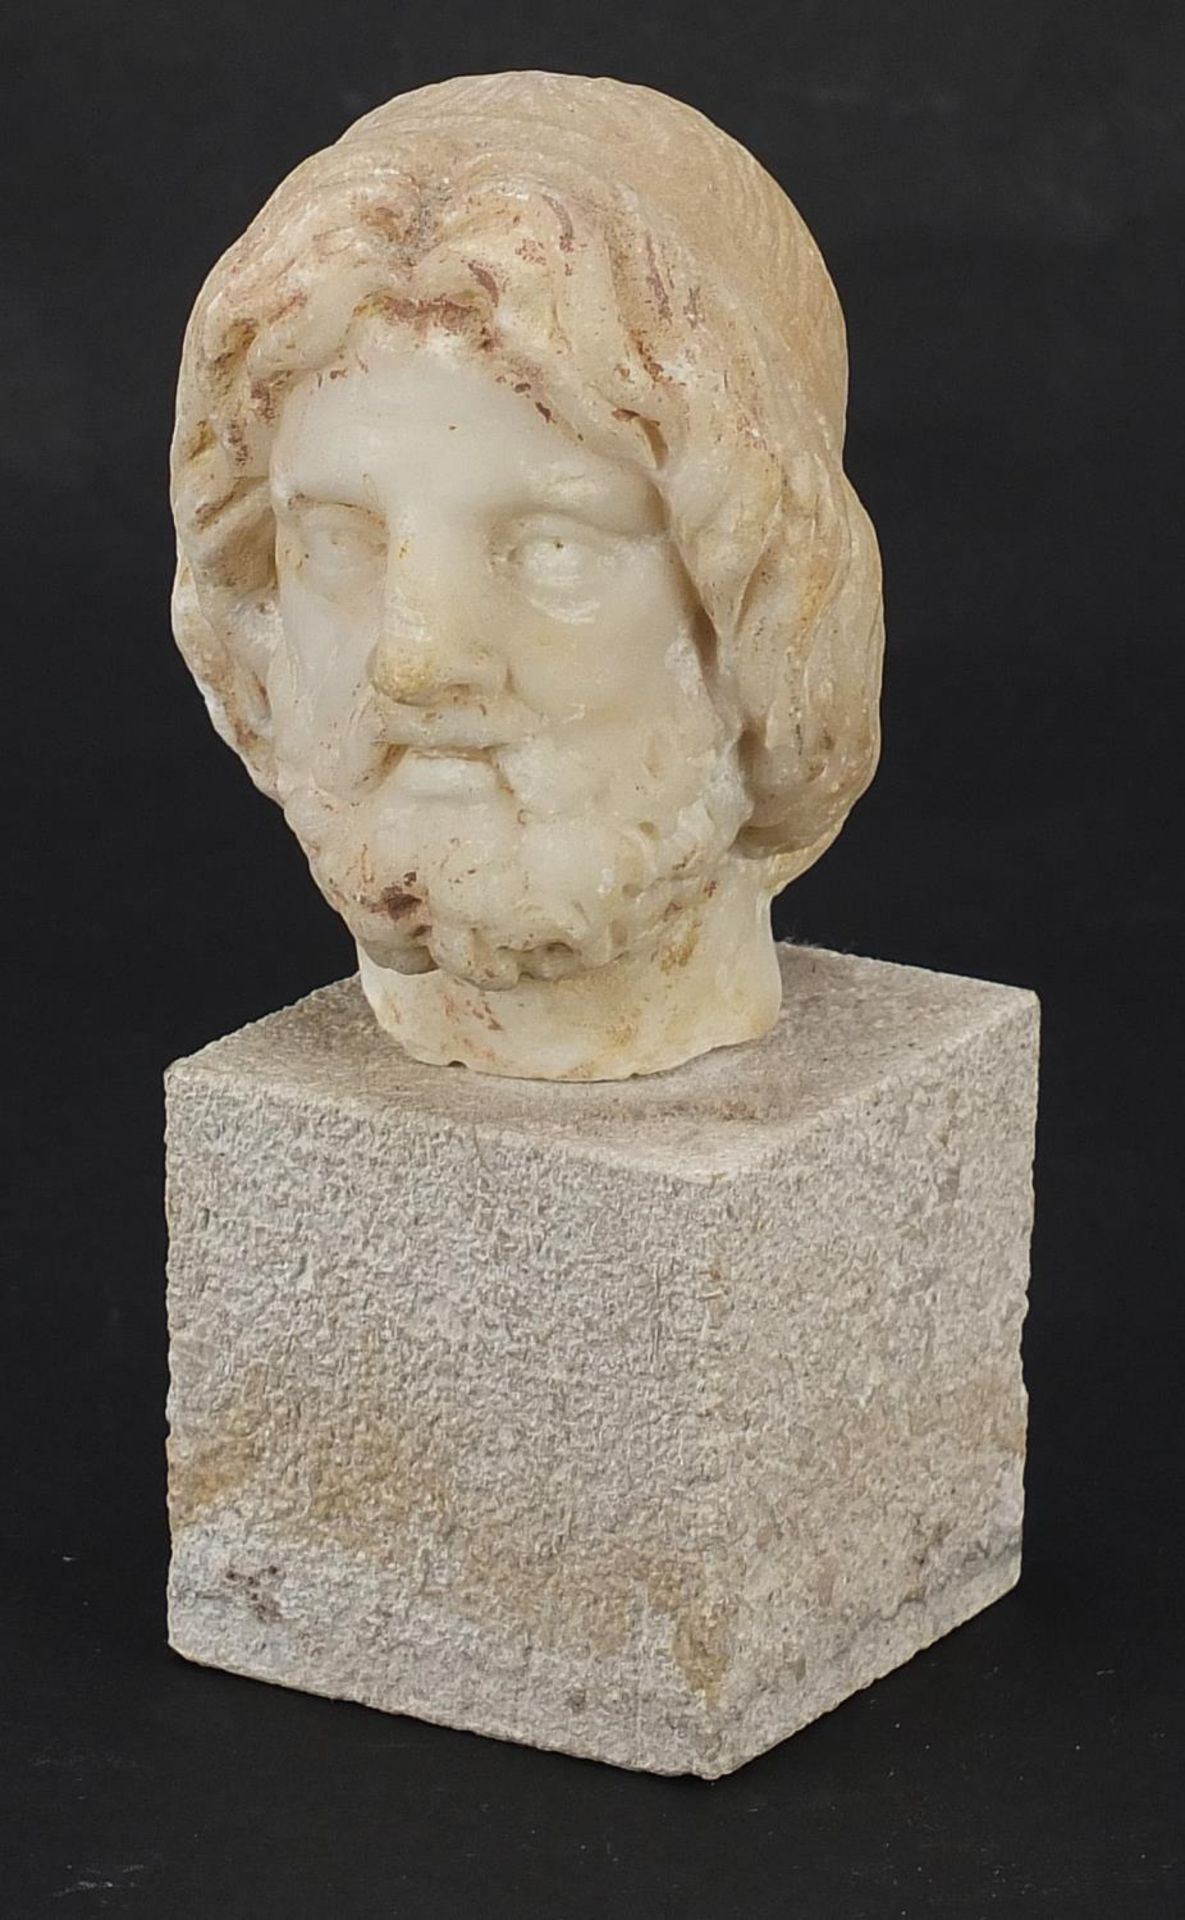 Antique carved white marble bust of a bearded man raised on a square block base, possibly Roman or